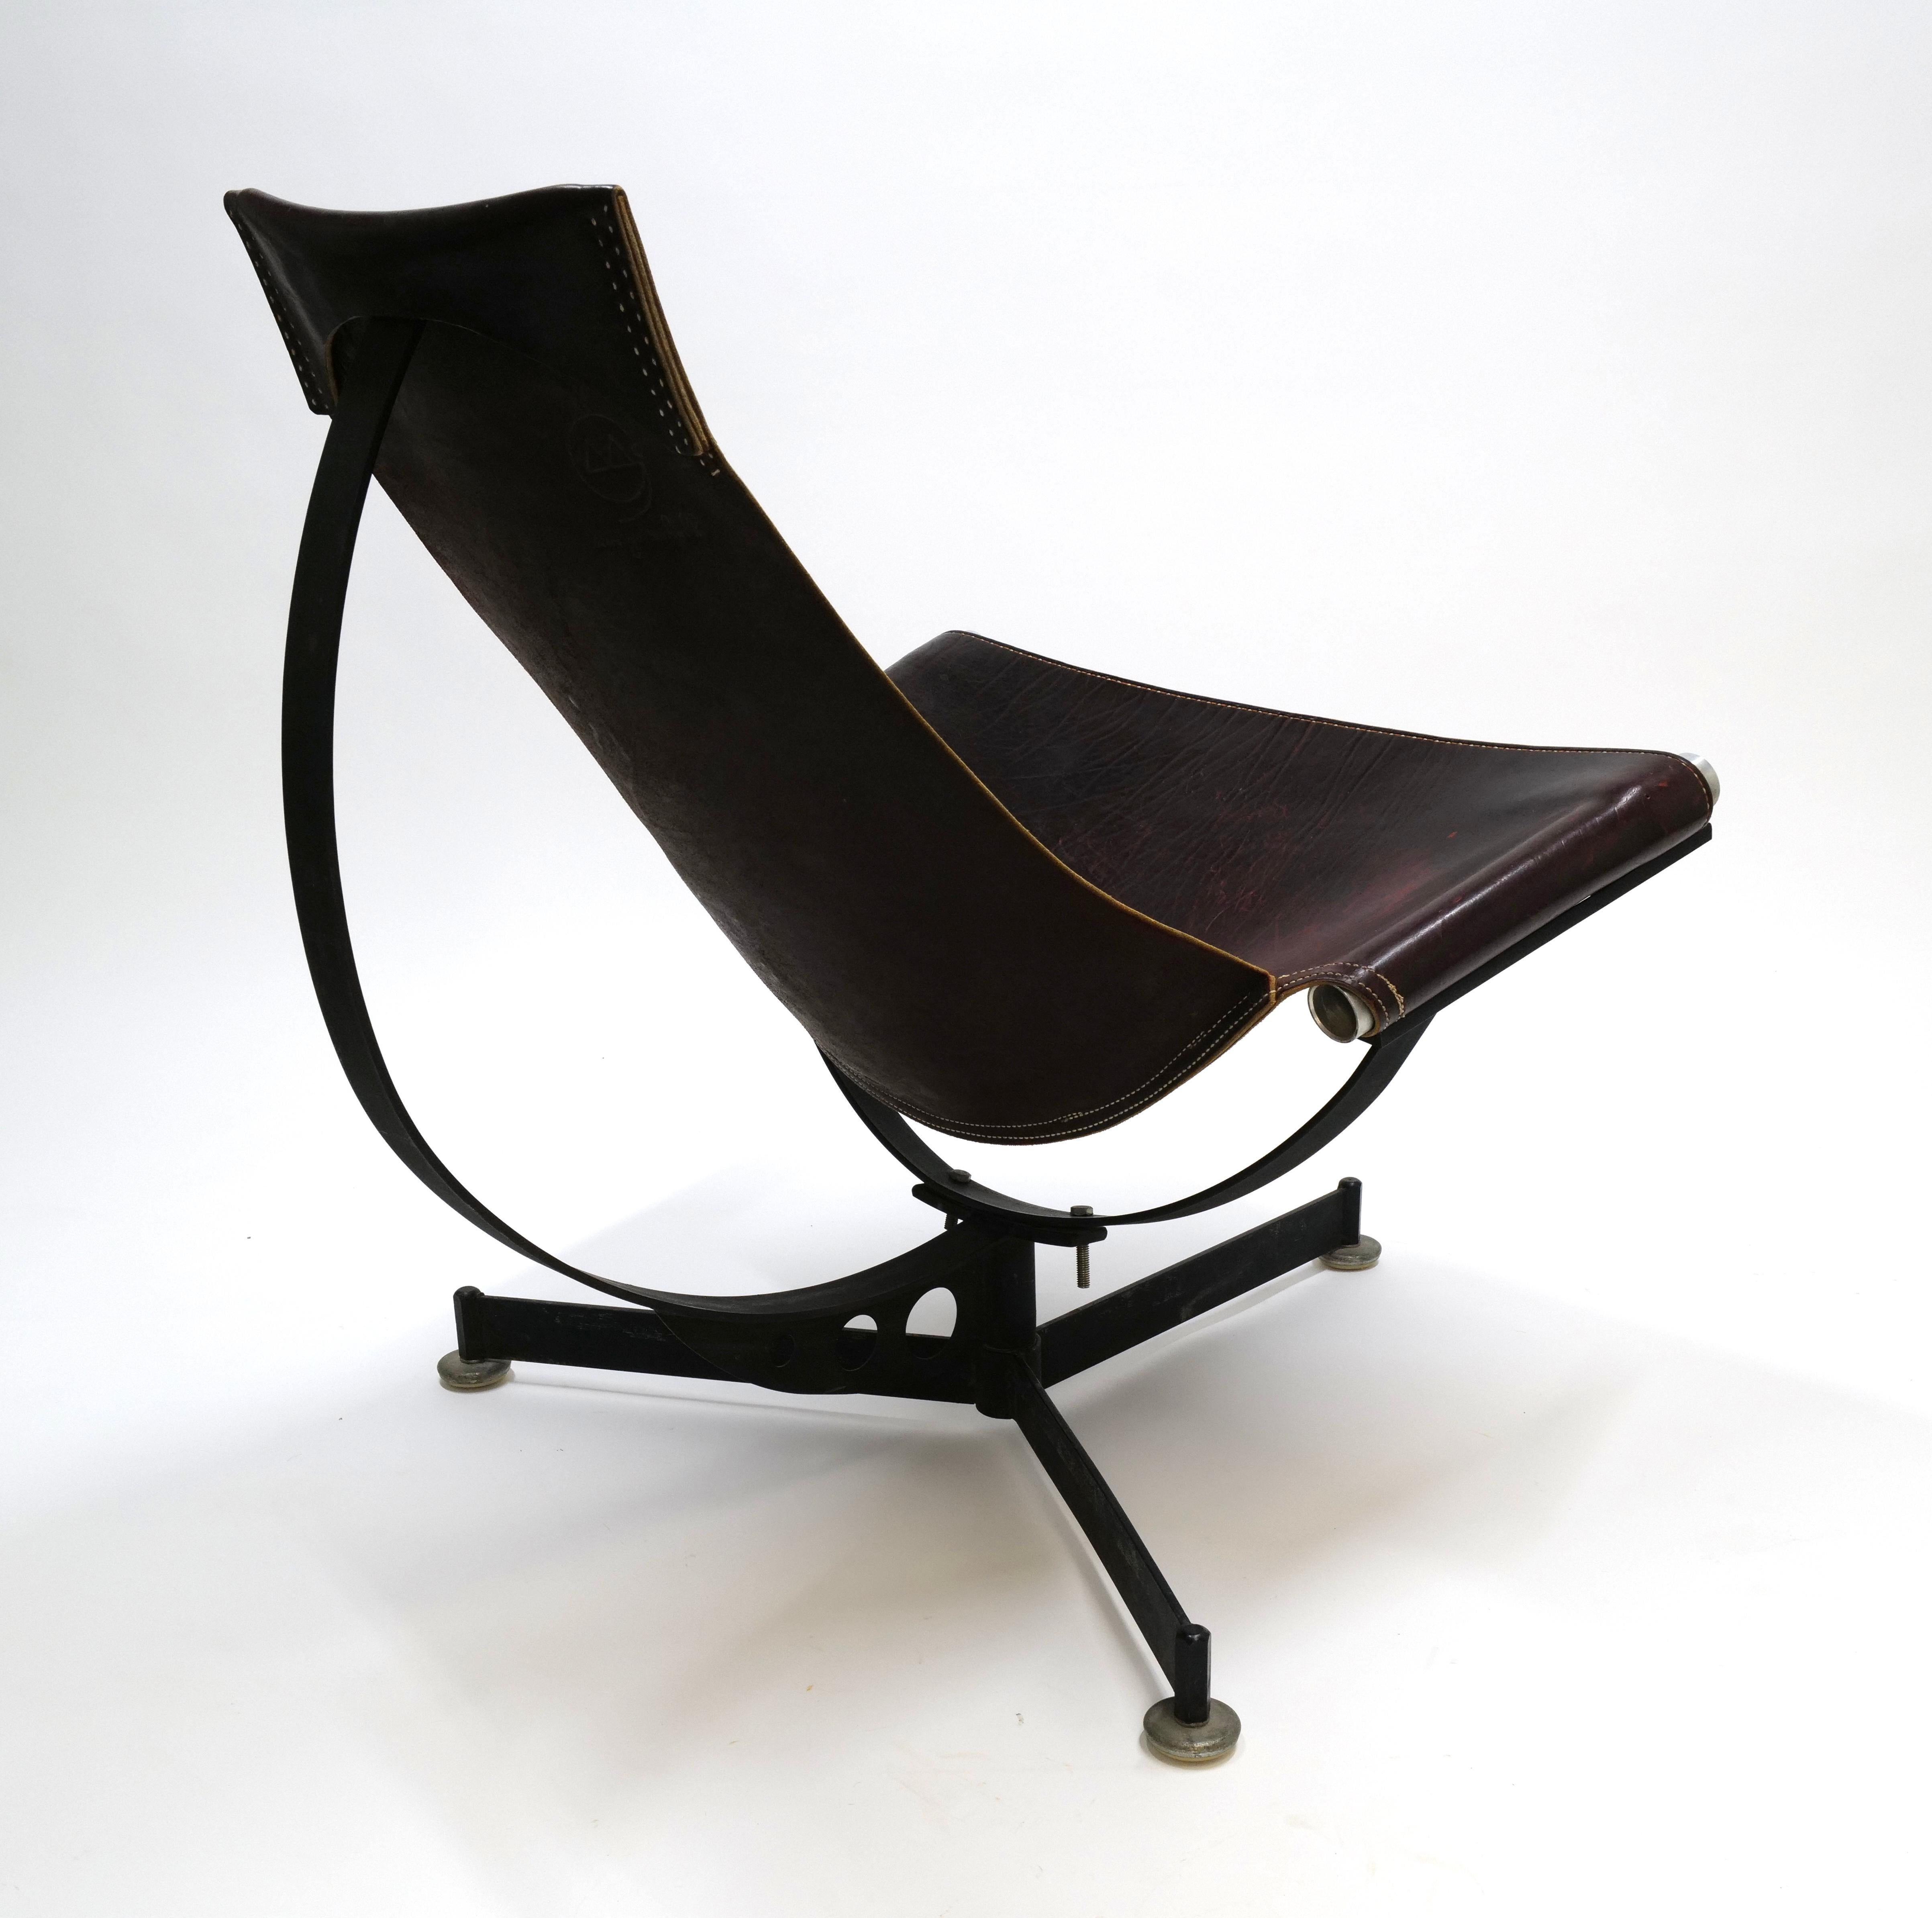 Steel and Leather Lounge Chair by Max Gottschalk In Good Condition For Sale In Oklahoma City, OK